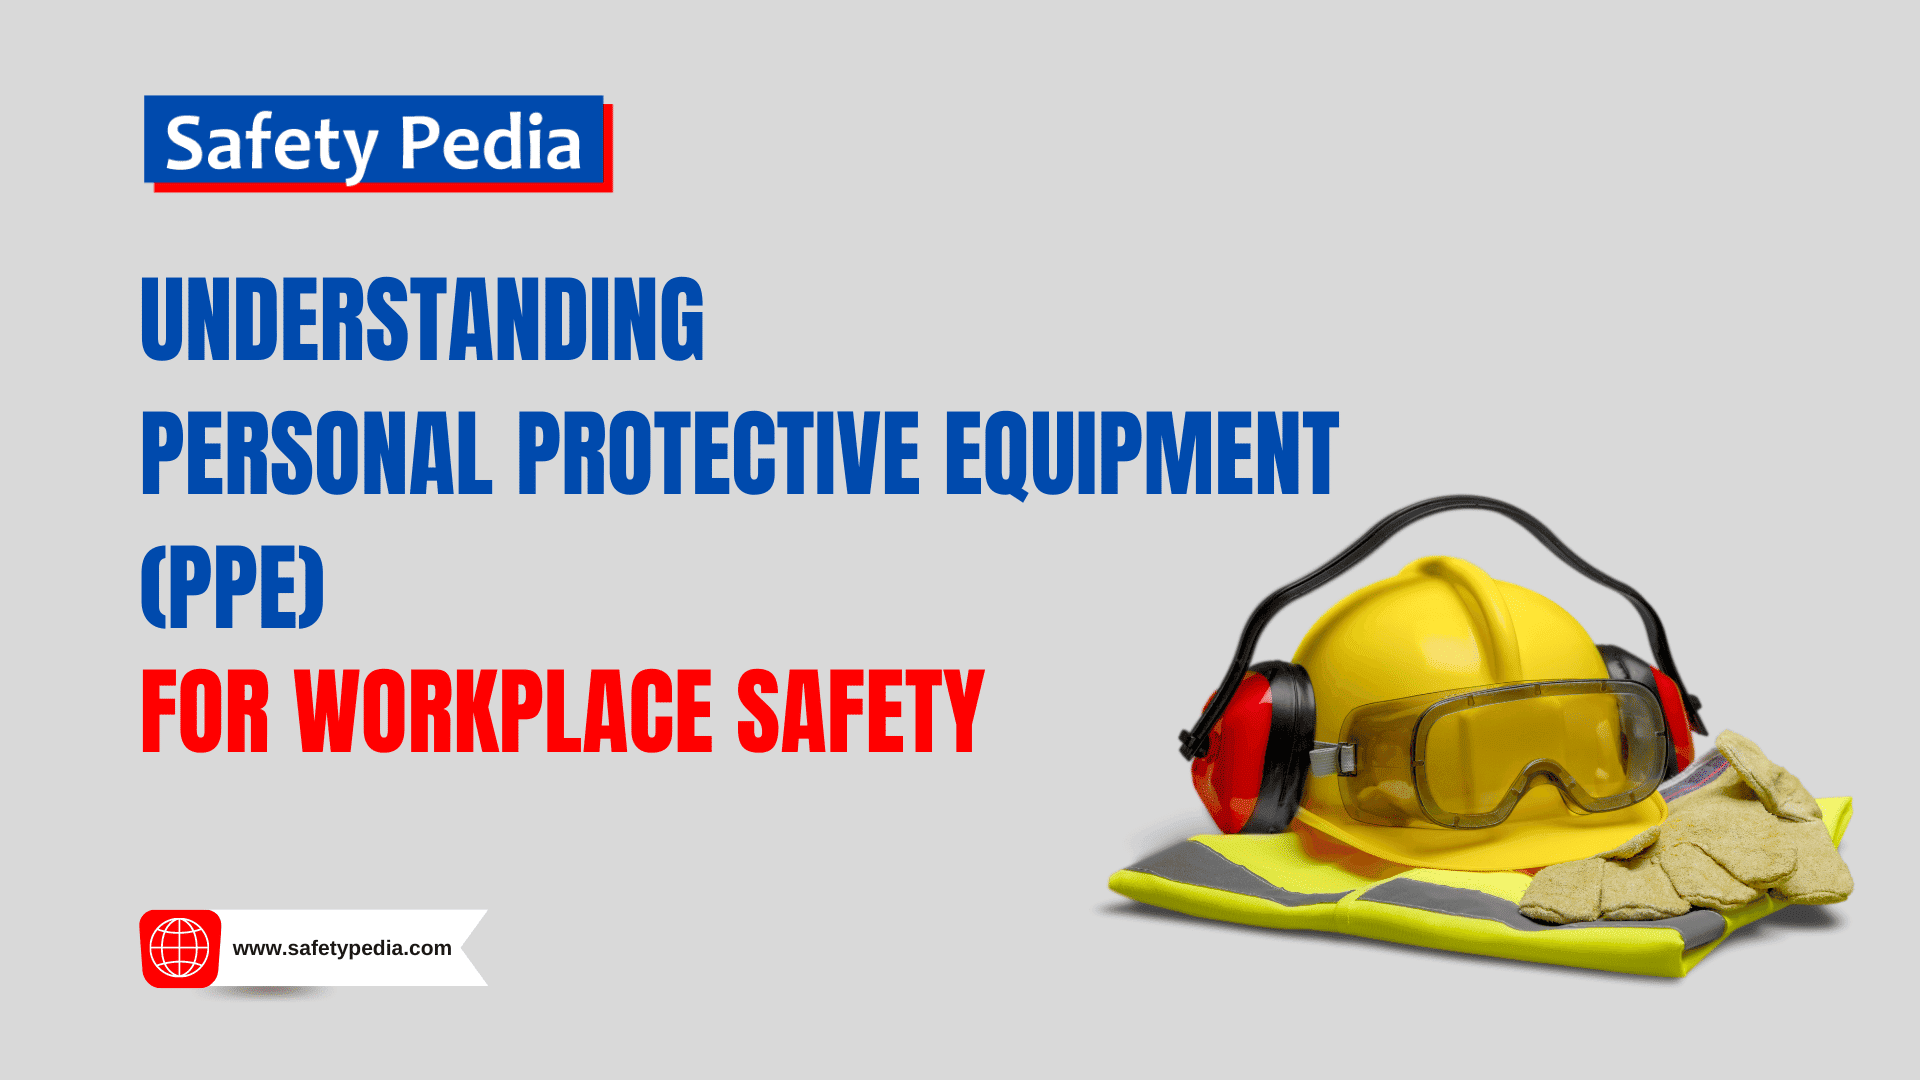 Personal protective equipment (PPE) refers to specialized equipment, clothing, and accessories that are designed to protect people from physical, biological, chemical, ergonomic, and other workplace hazards. Safetypedia